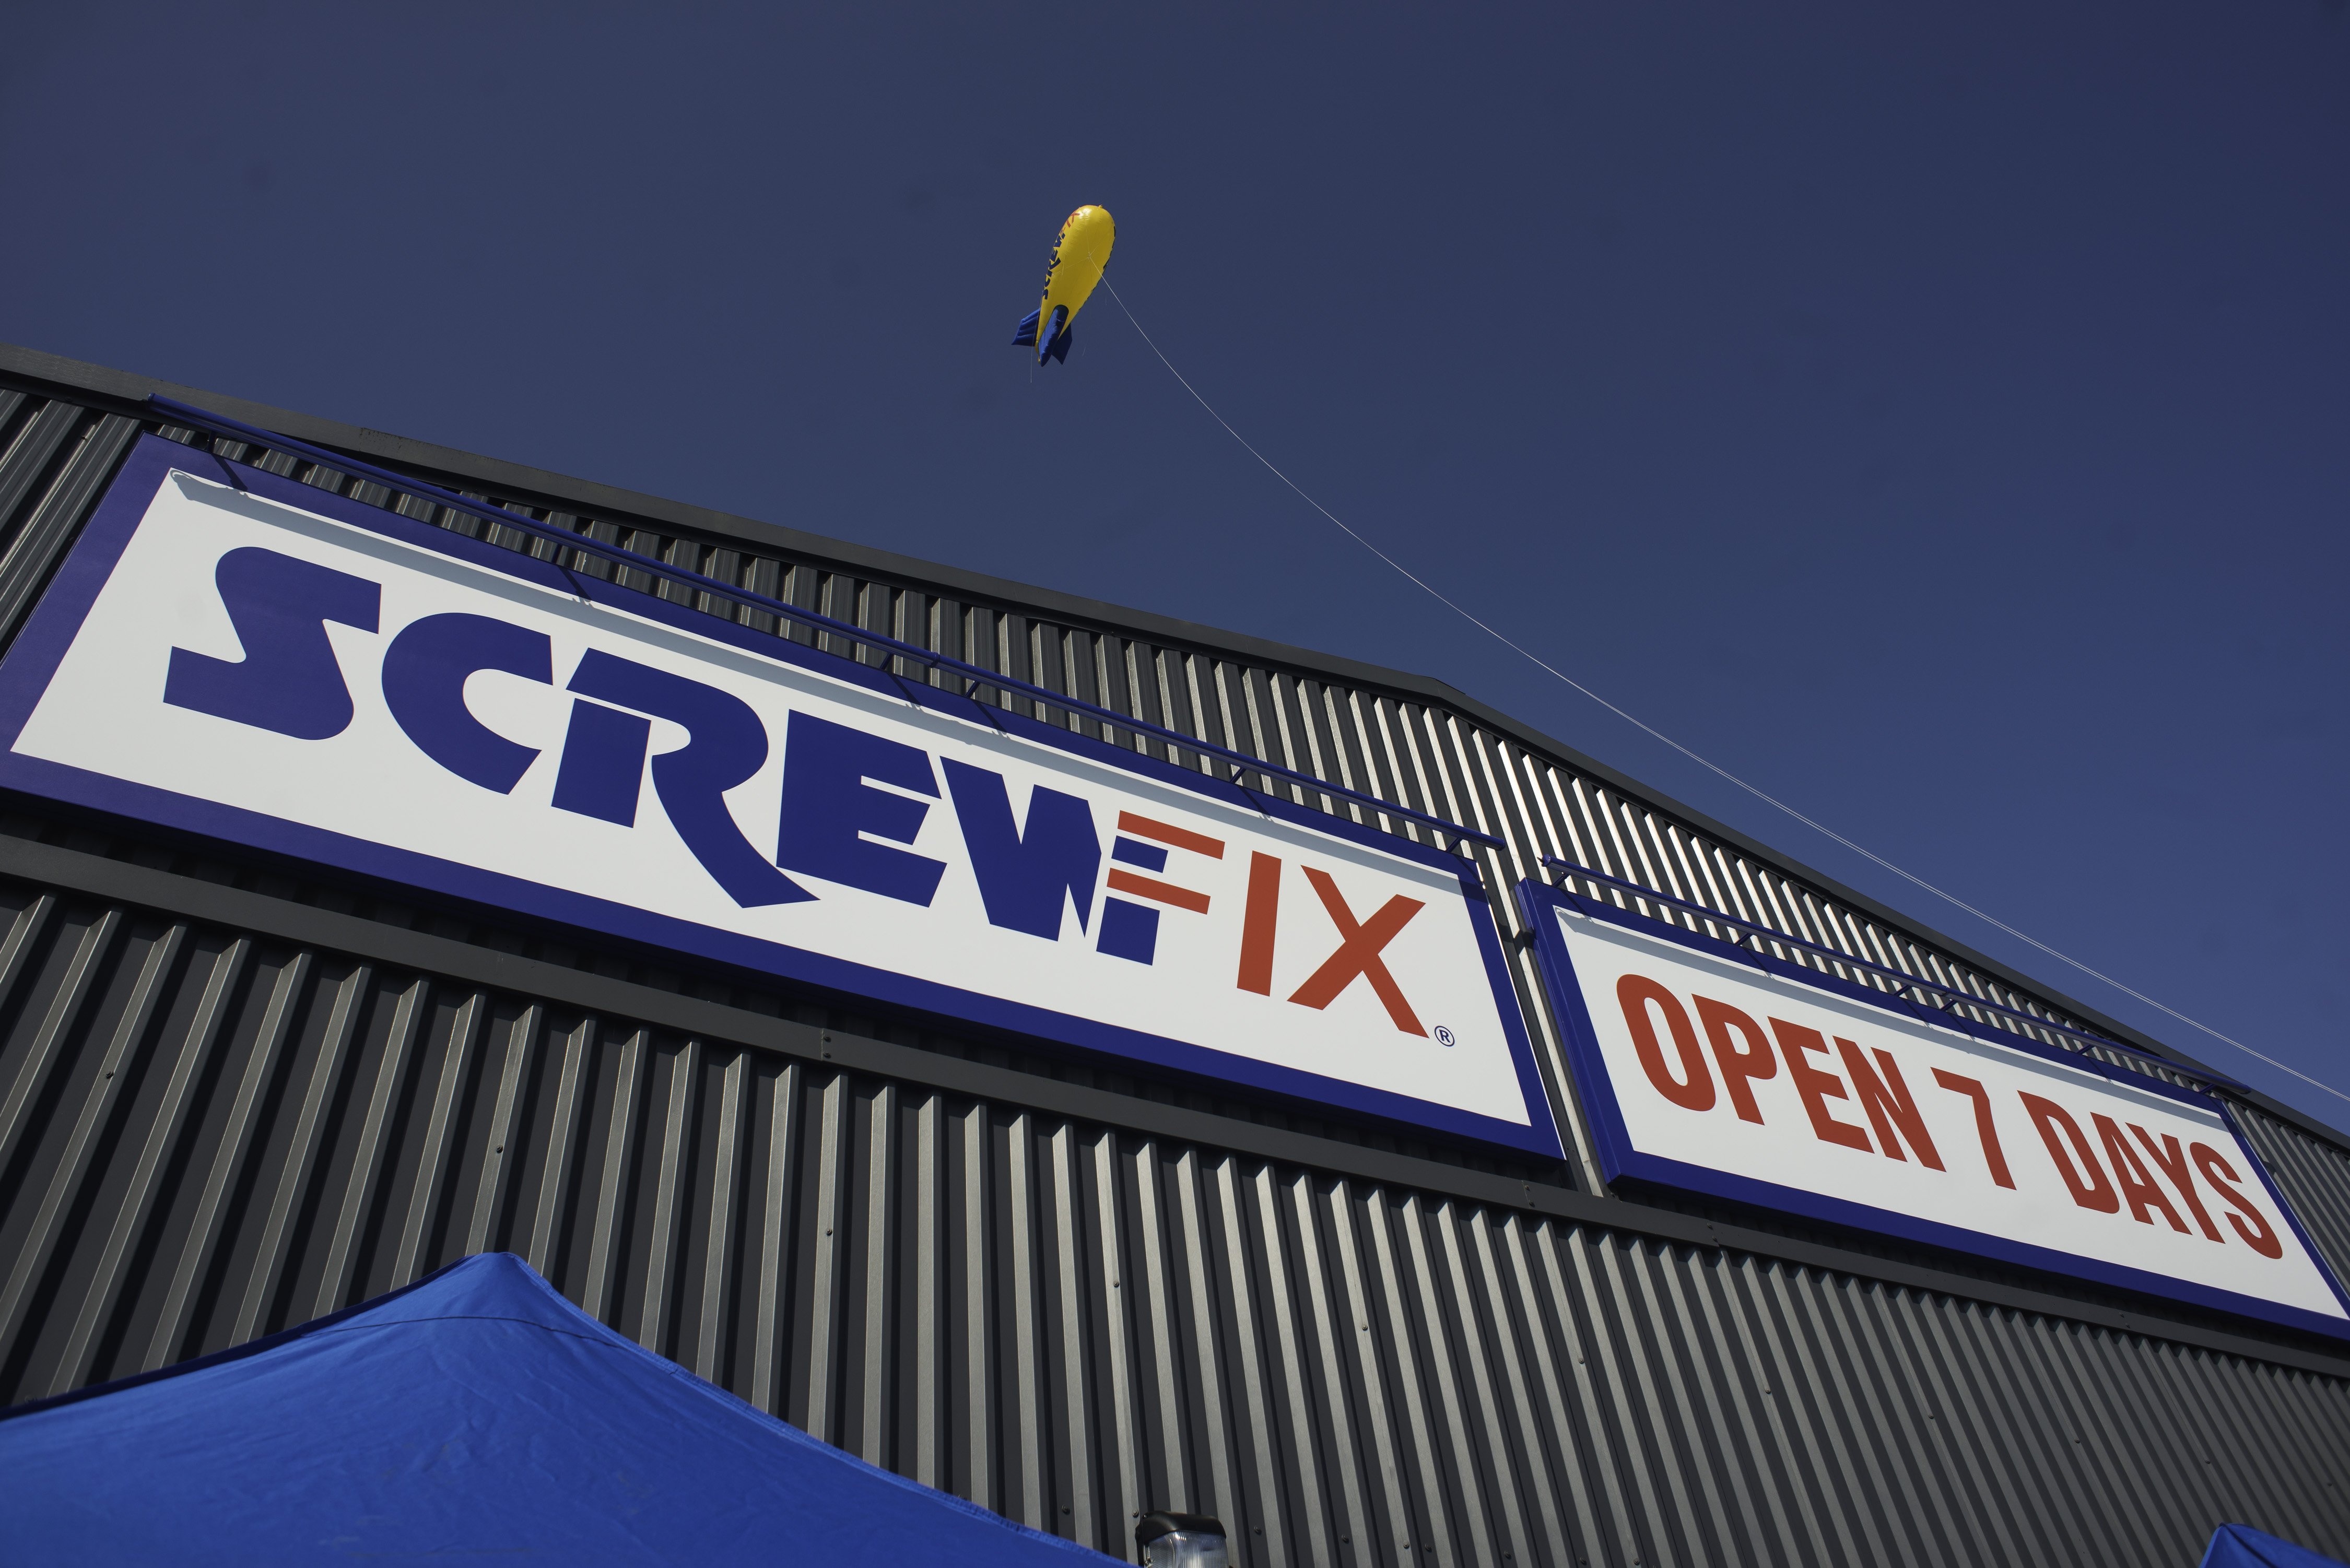 Gravesend’s first Screwfix store to open on 13 August